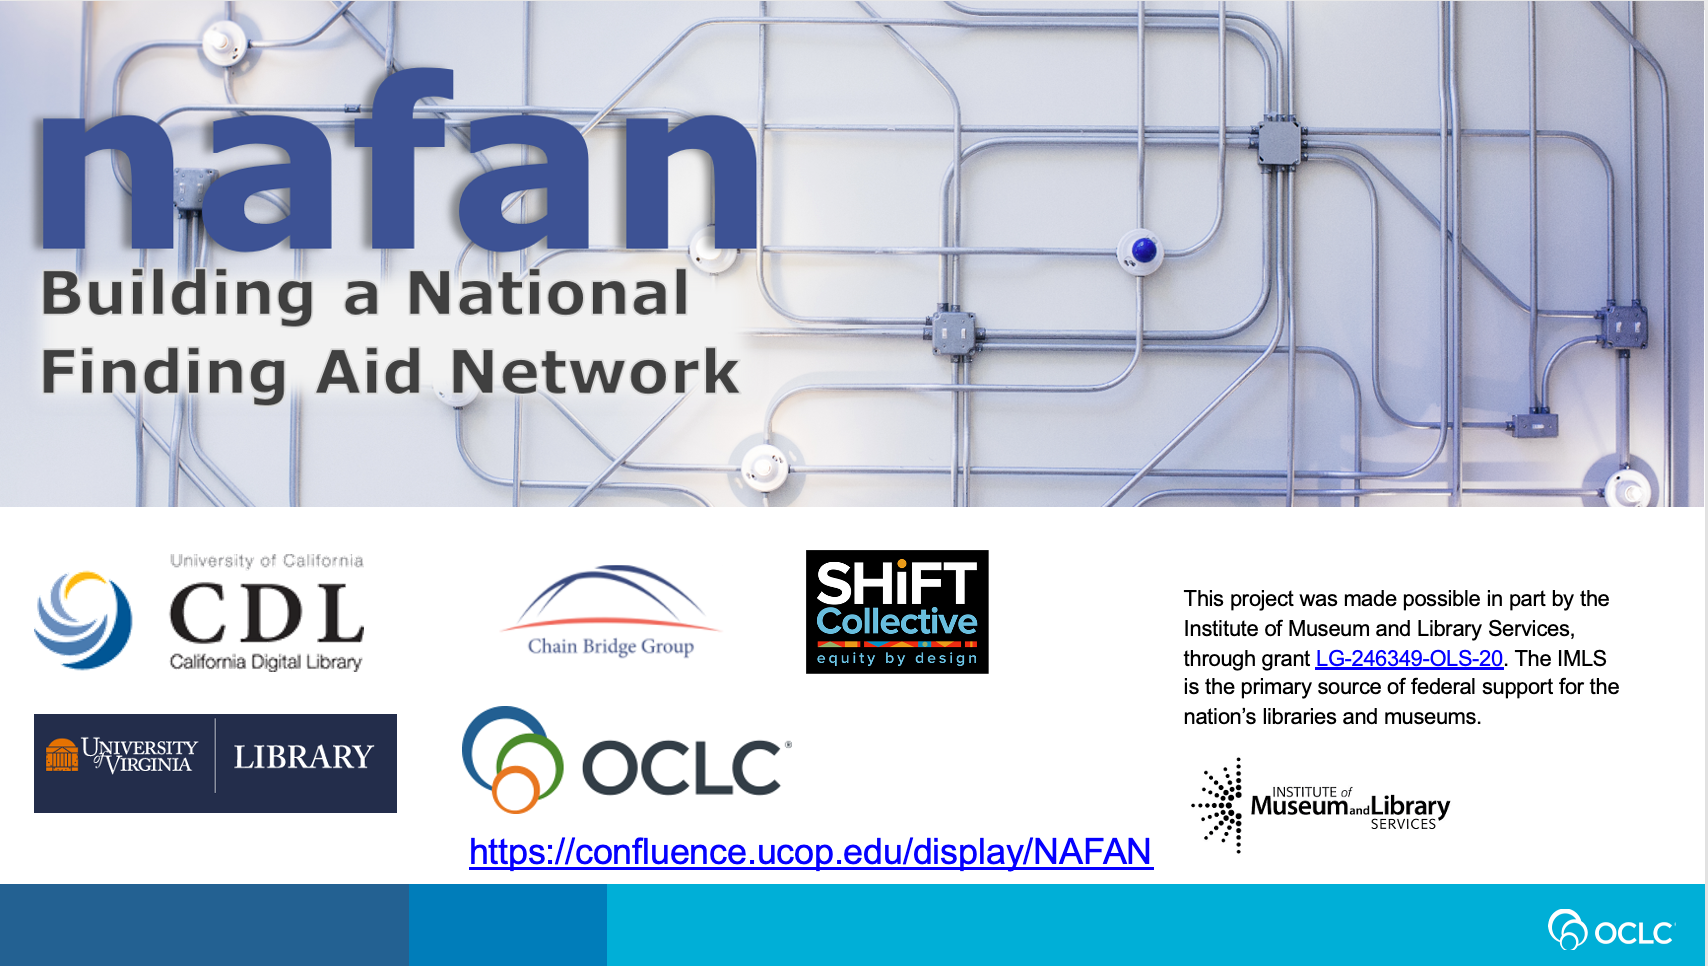 NAFAN Building a Natinal Finding Aid Network